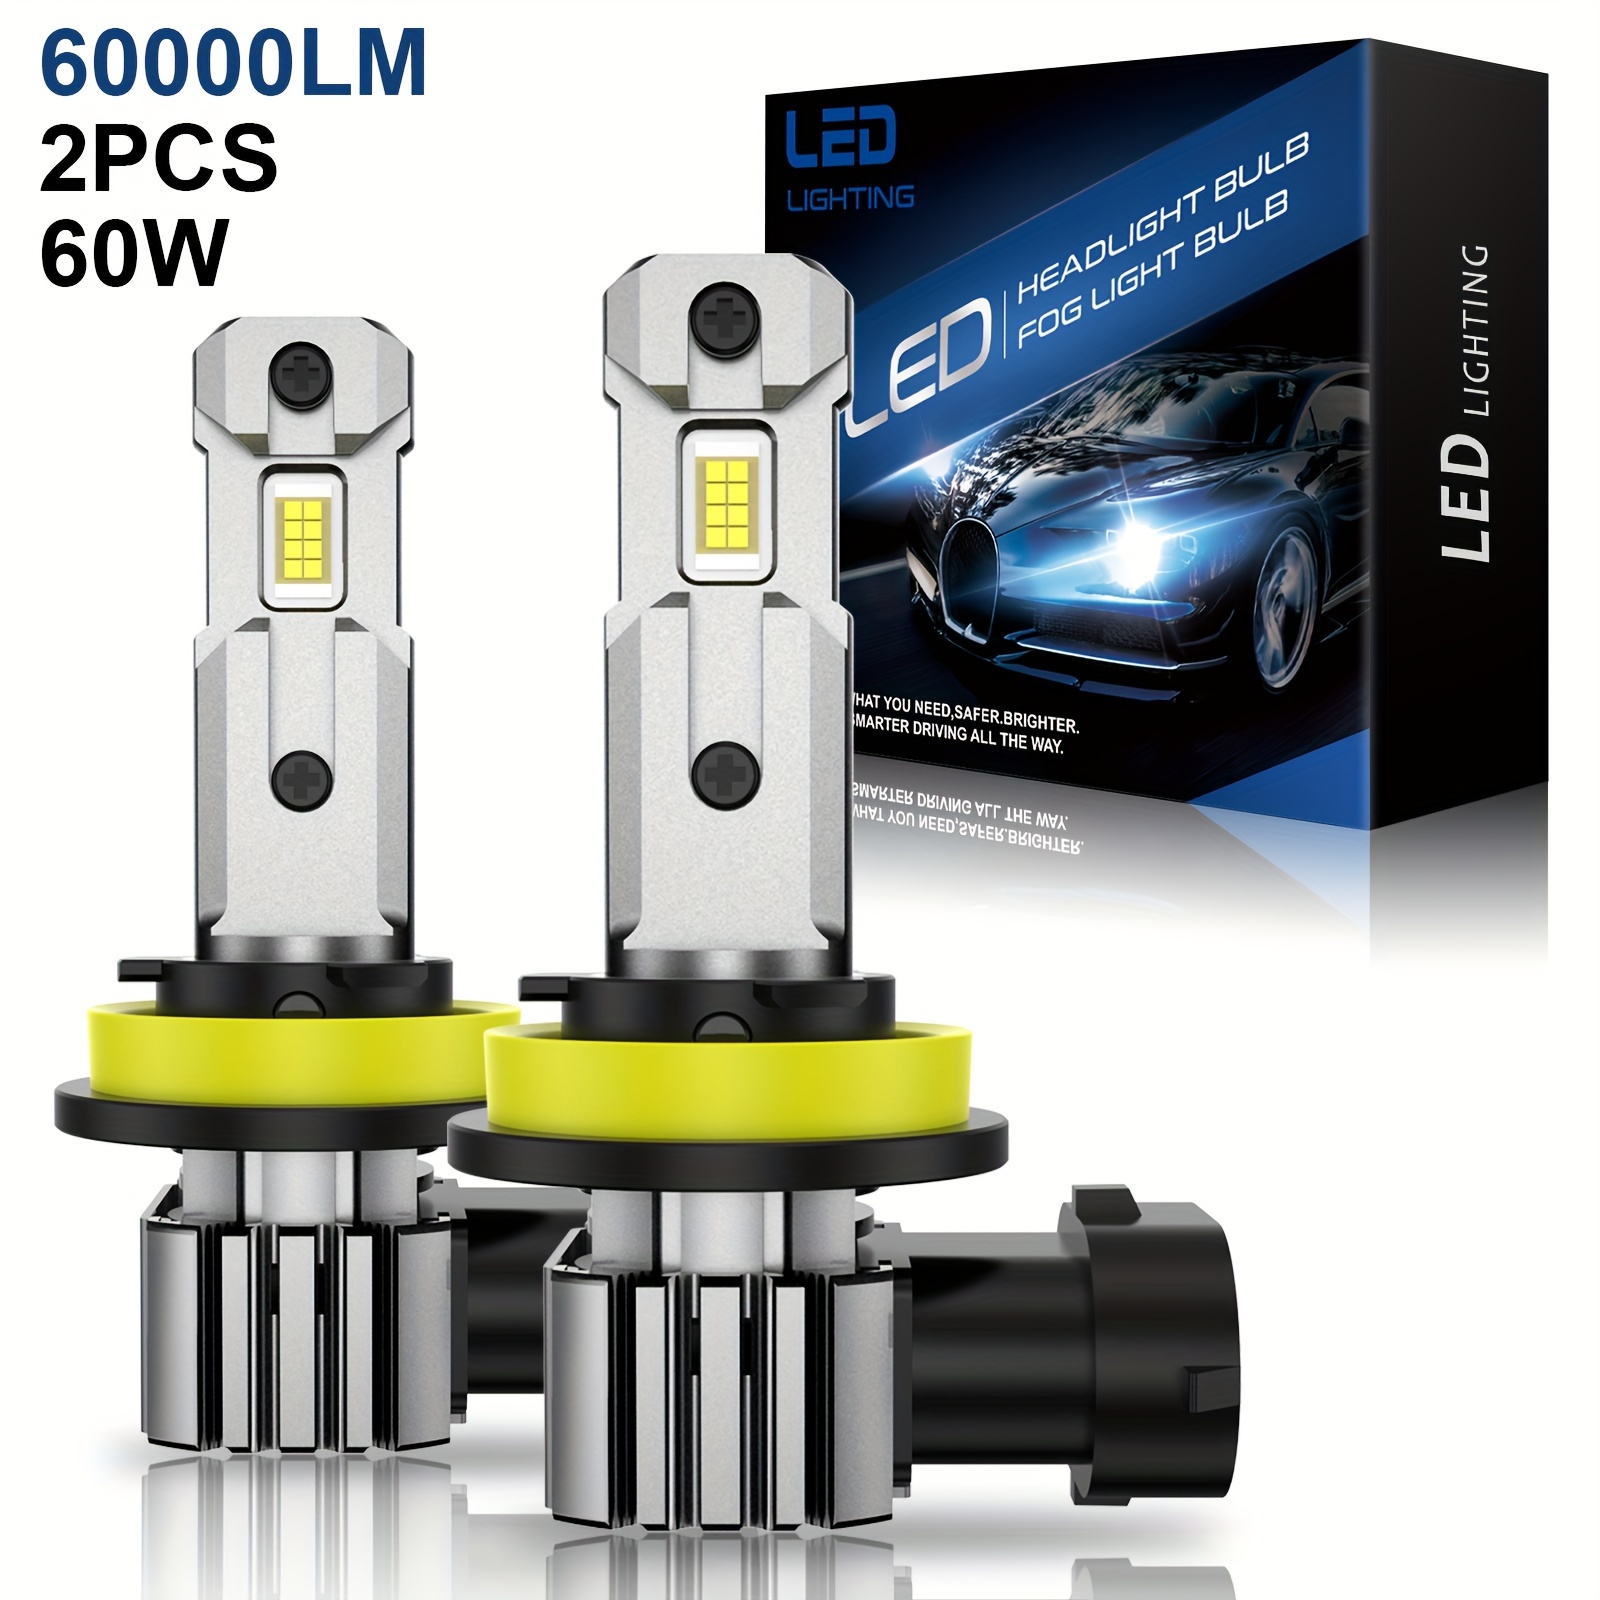 

2pcs Support- H11, H8, H9, Hb3, 9005, Hb4, 9006- For Upgrading Your Car Led Headlights 60000lm Super Bright Car Light 6500k White Light, Plug And Play, Easy To Install